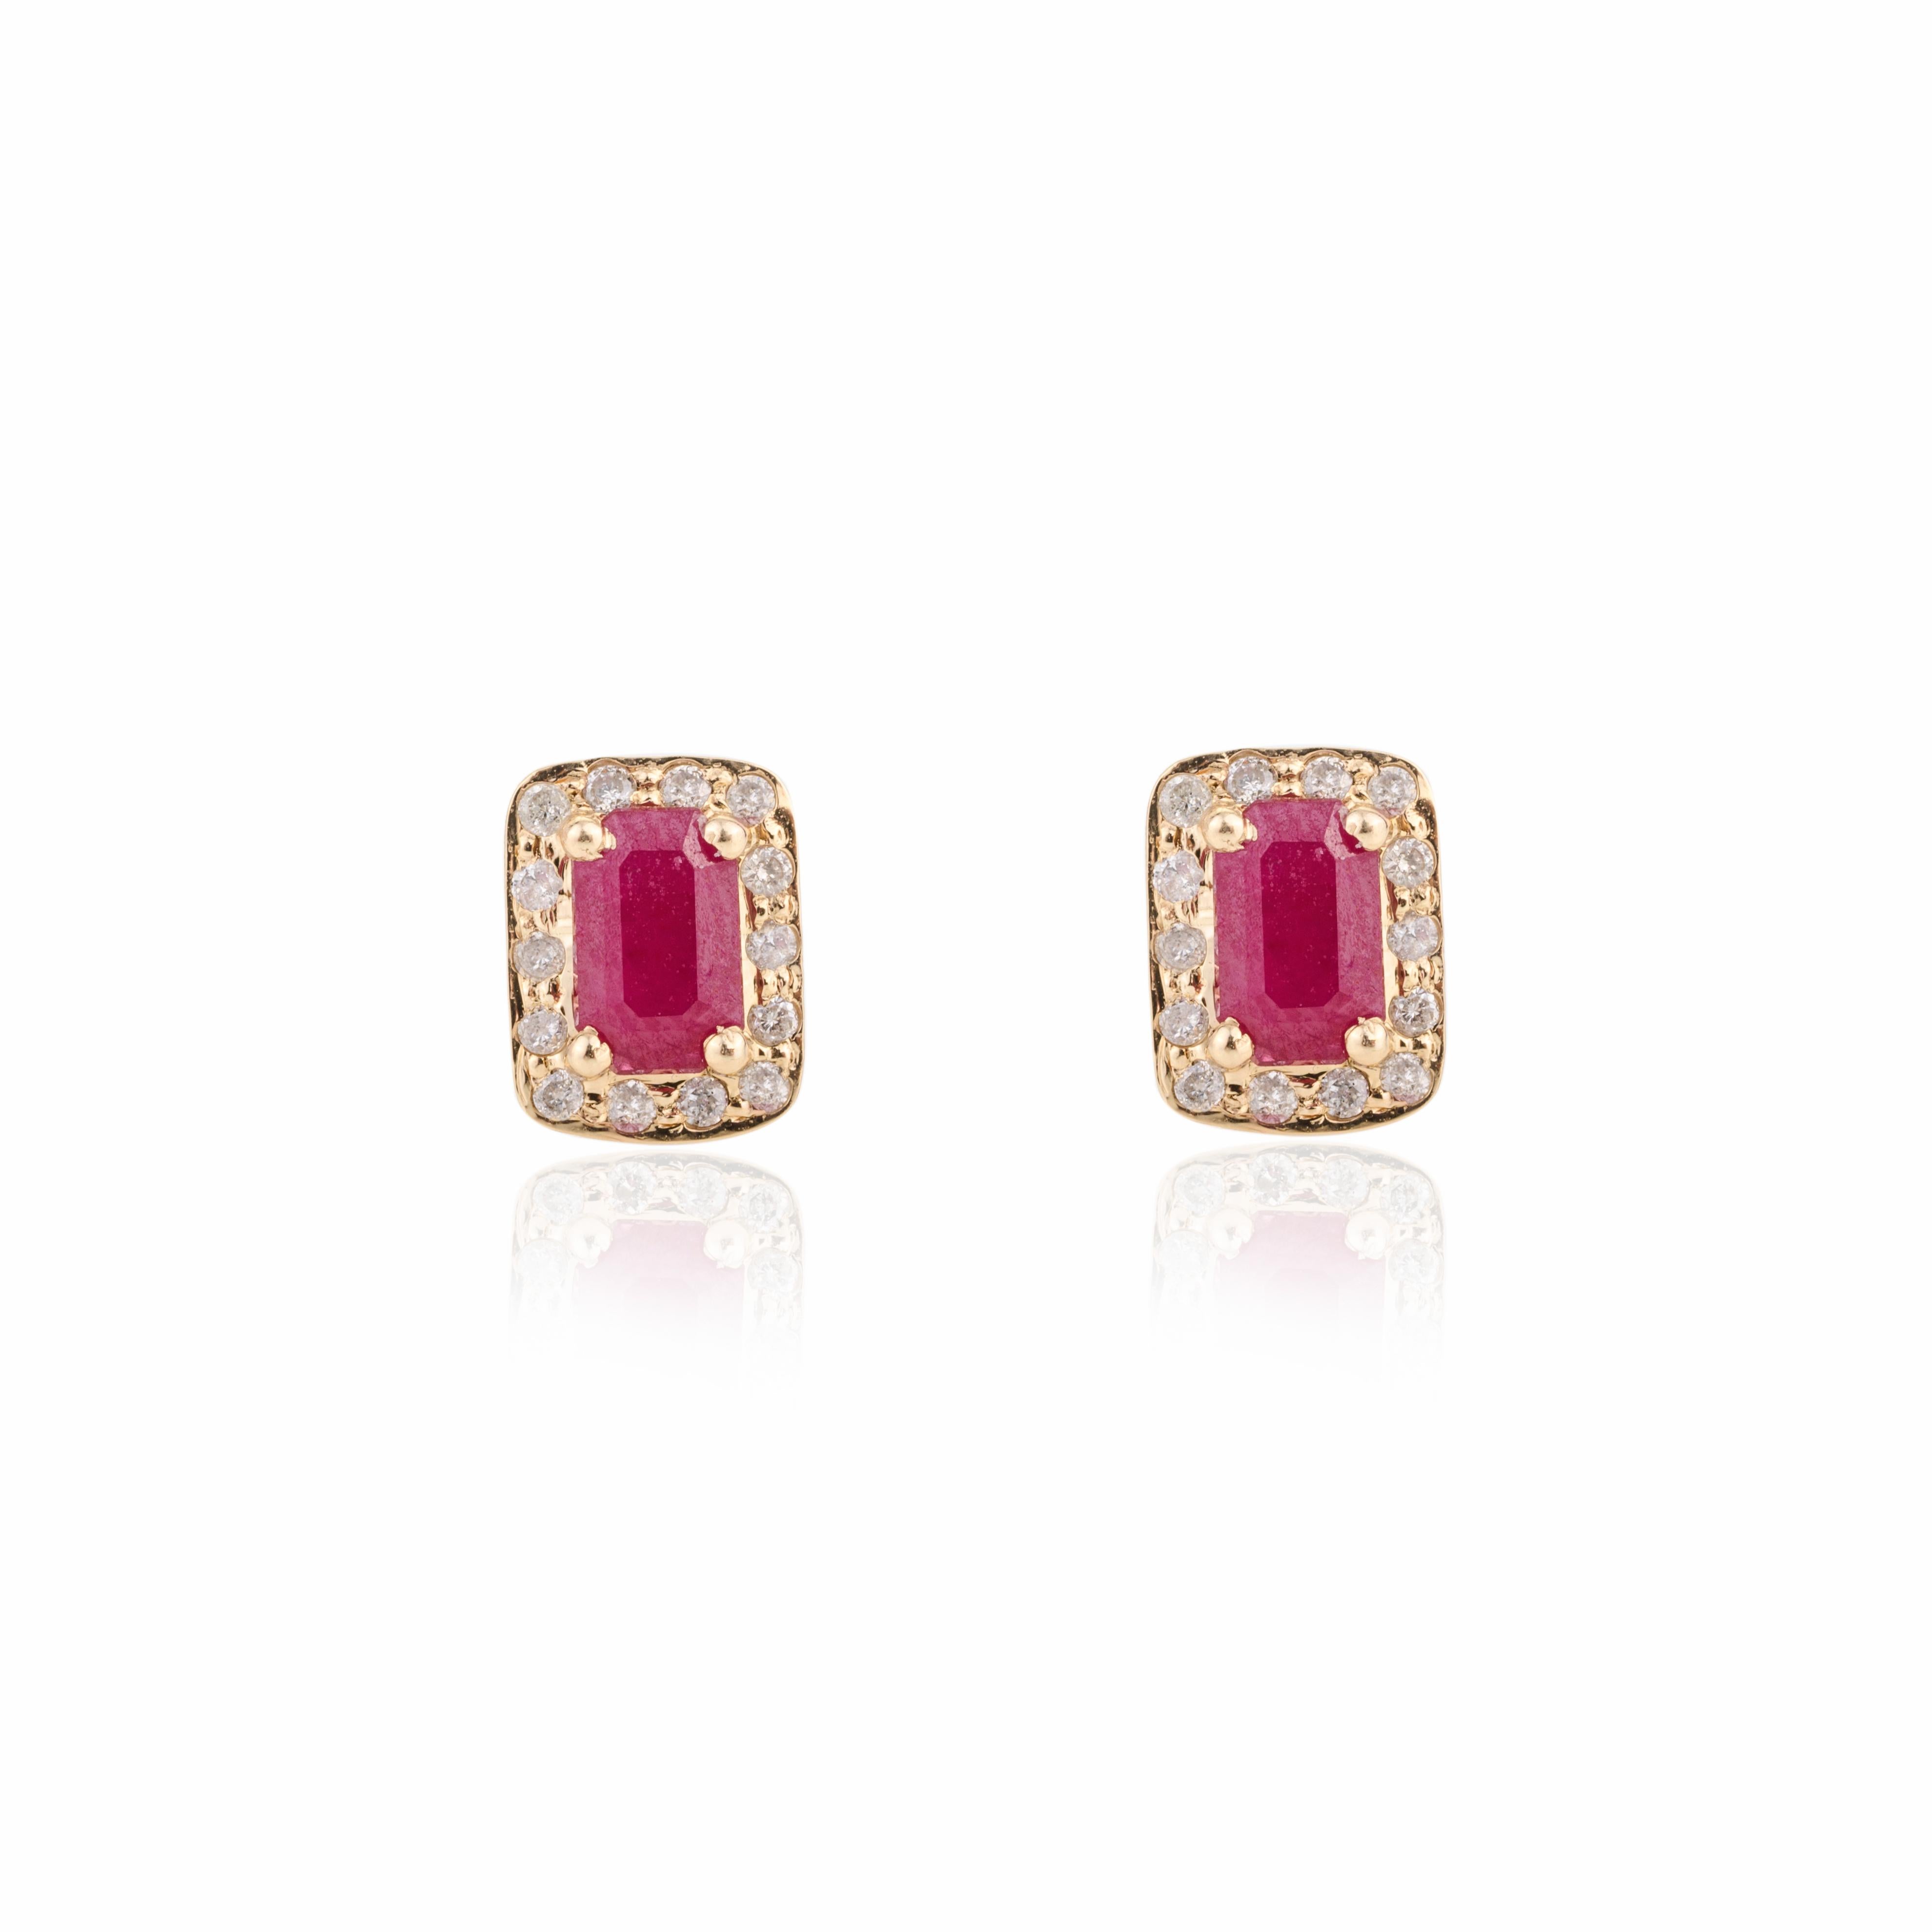 Contemporary 14k Gold Ruby Diamond Halo Stud Earrings Timeless Jewelry for Her For Sale